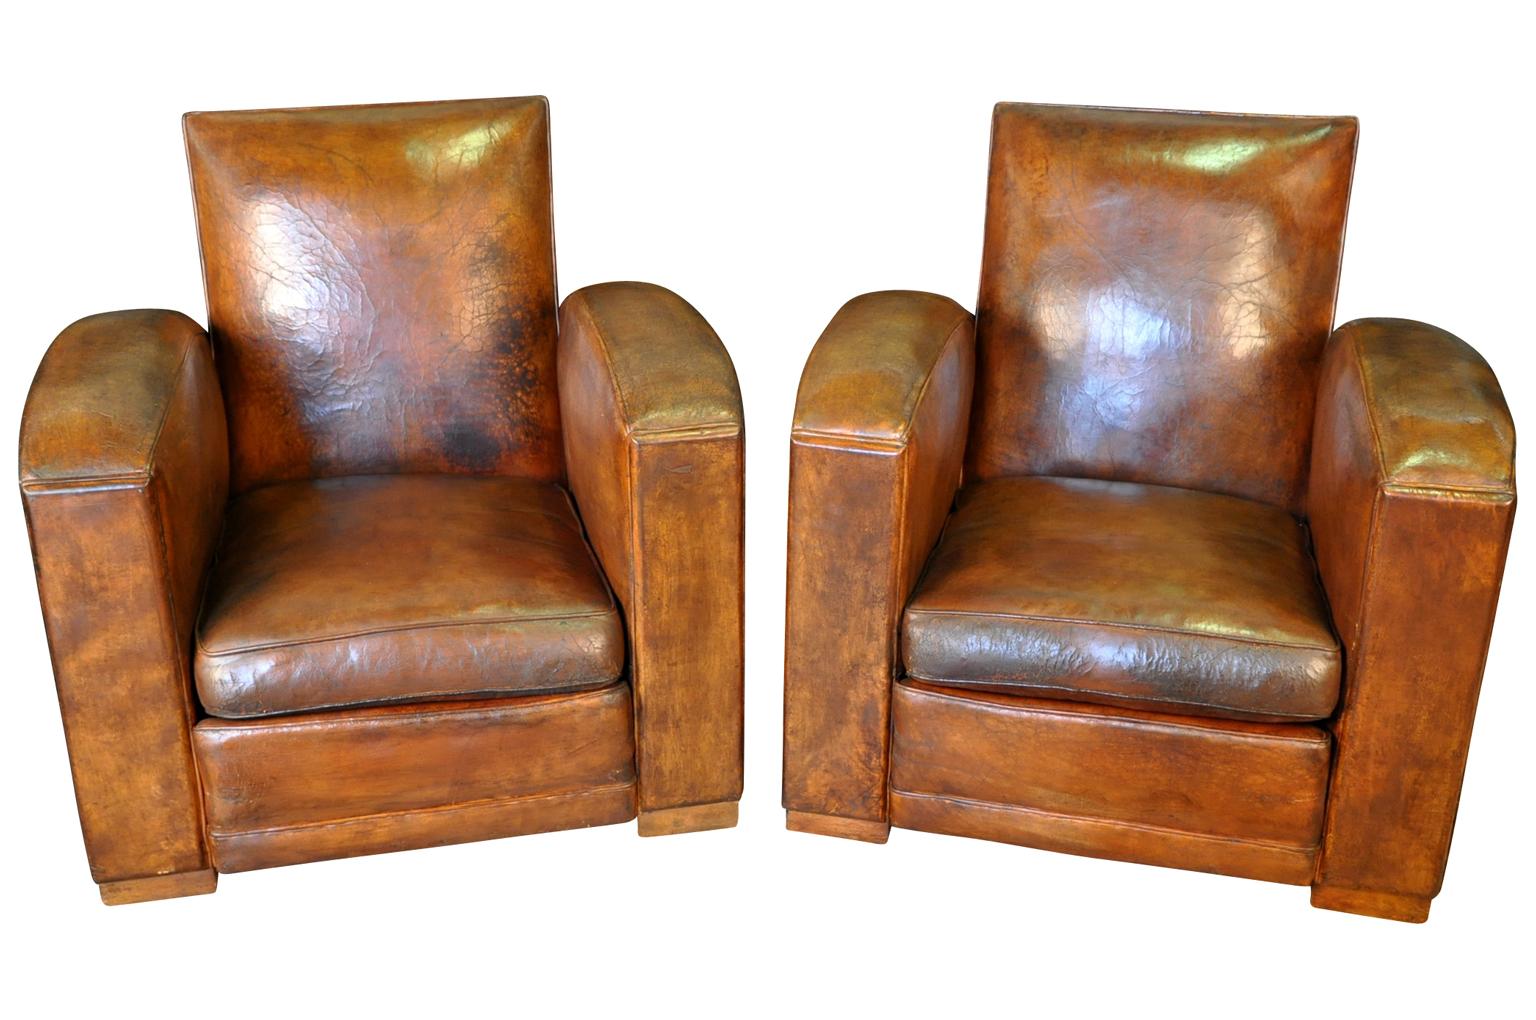 A terrific pair of French Art Deco club chairs in leather. Very sound and sturdy. Wonderful minimalists lines. Perfect for any living area, office or library.